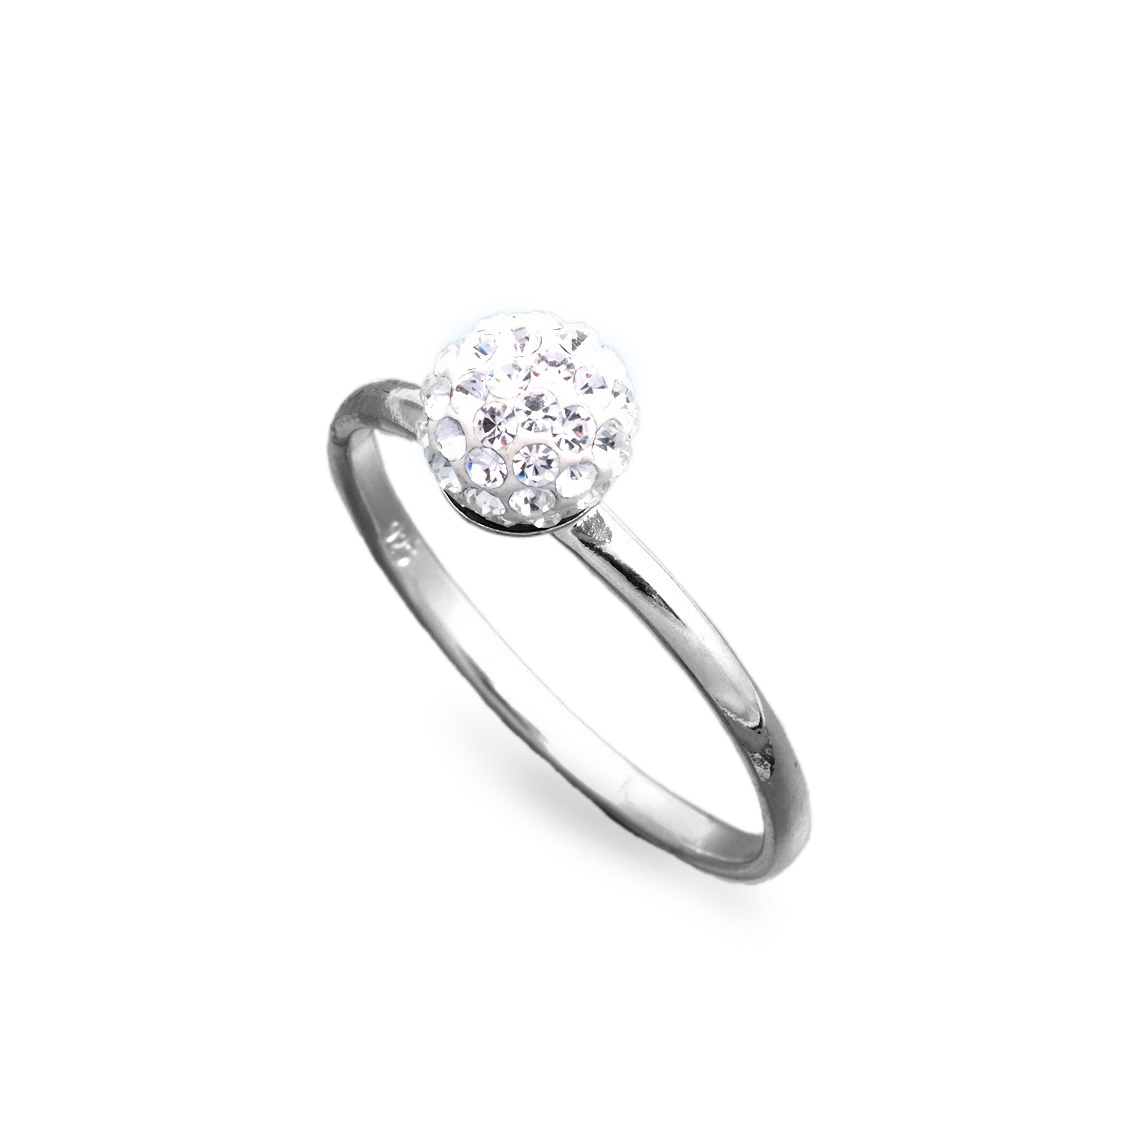 AllinStock Disco Ball Solitaire Cubic Zirconia Ring Sterling Silver 925 